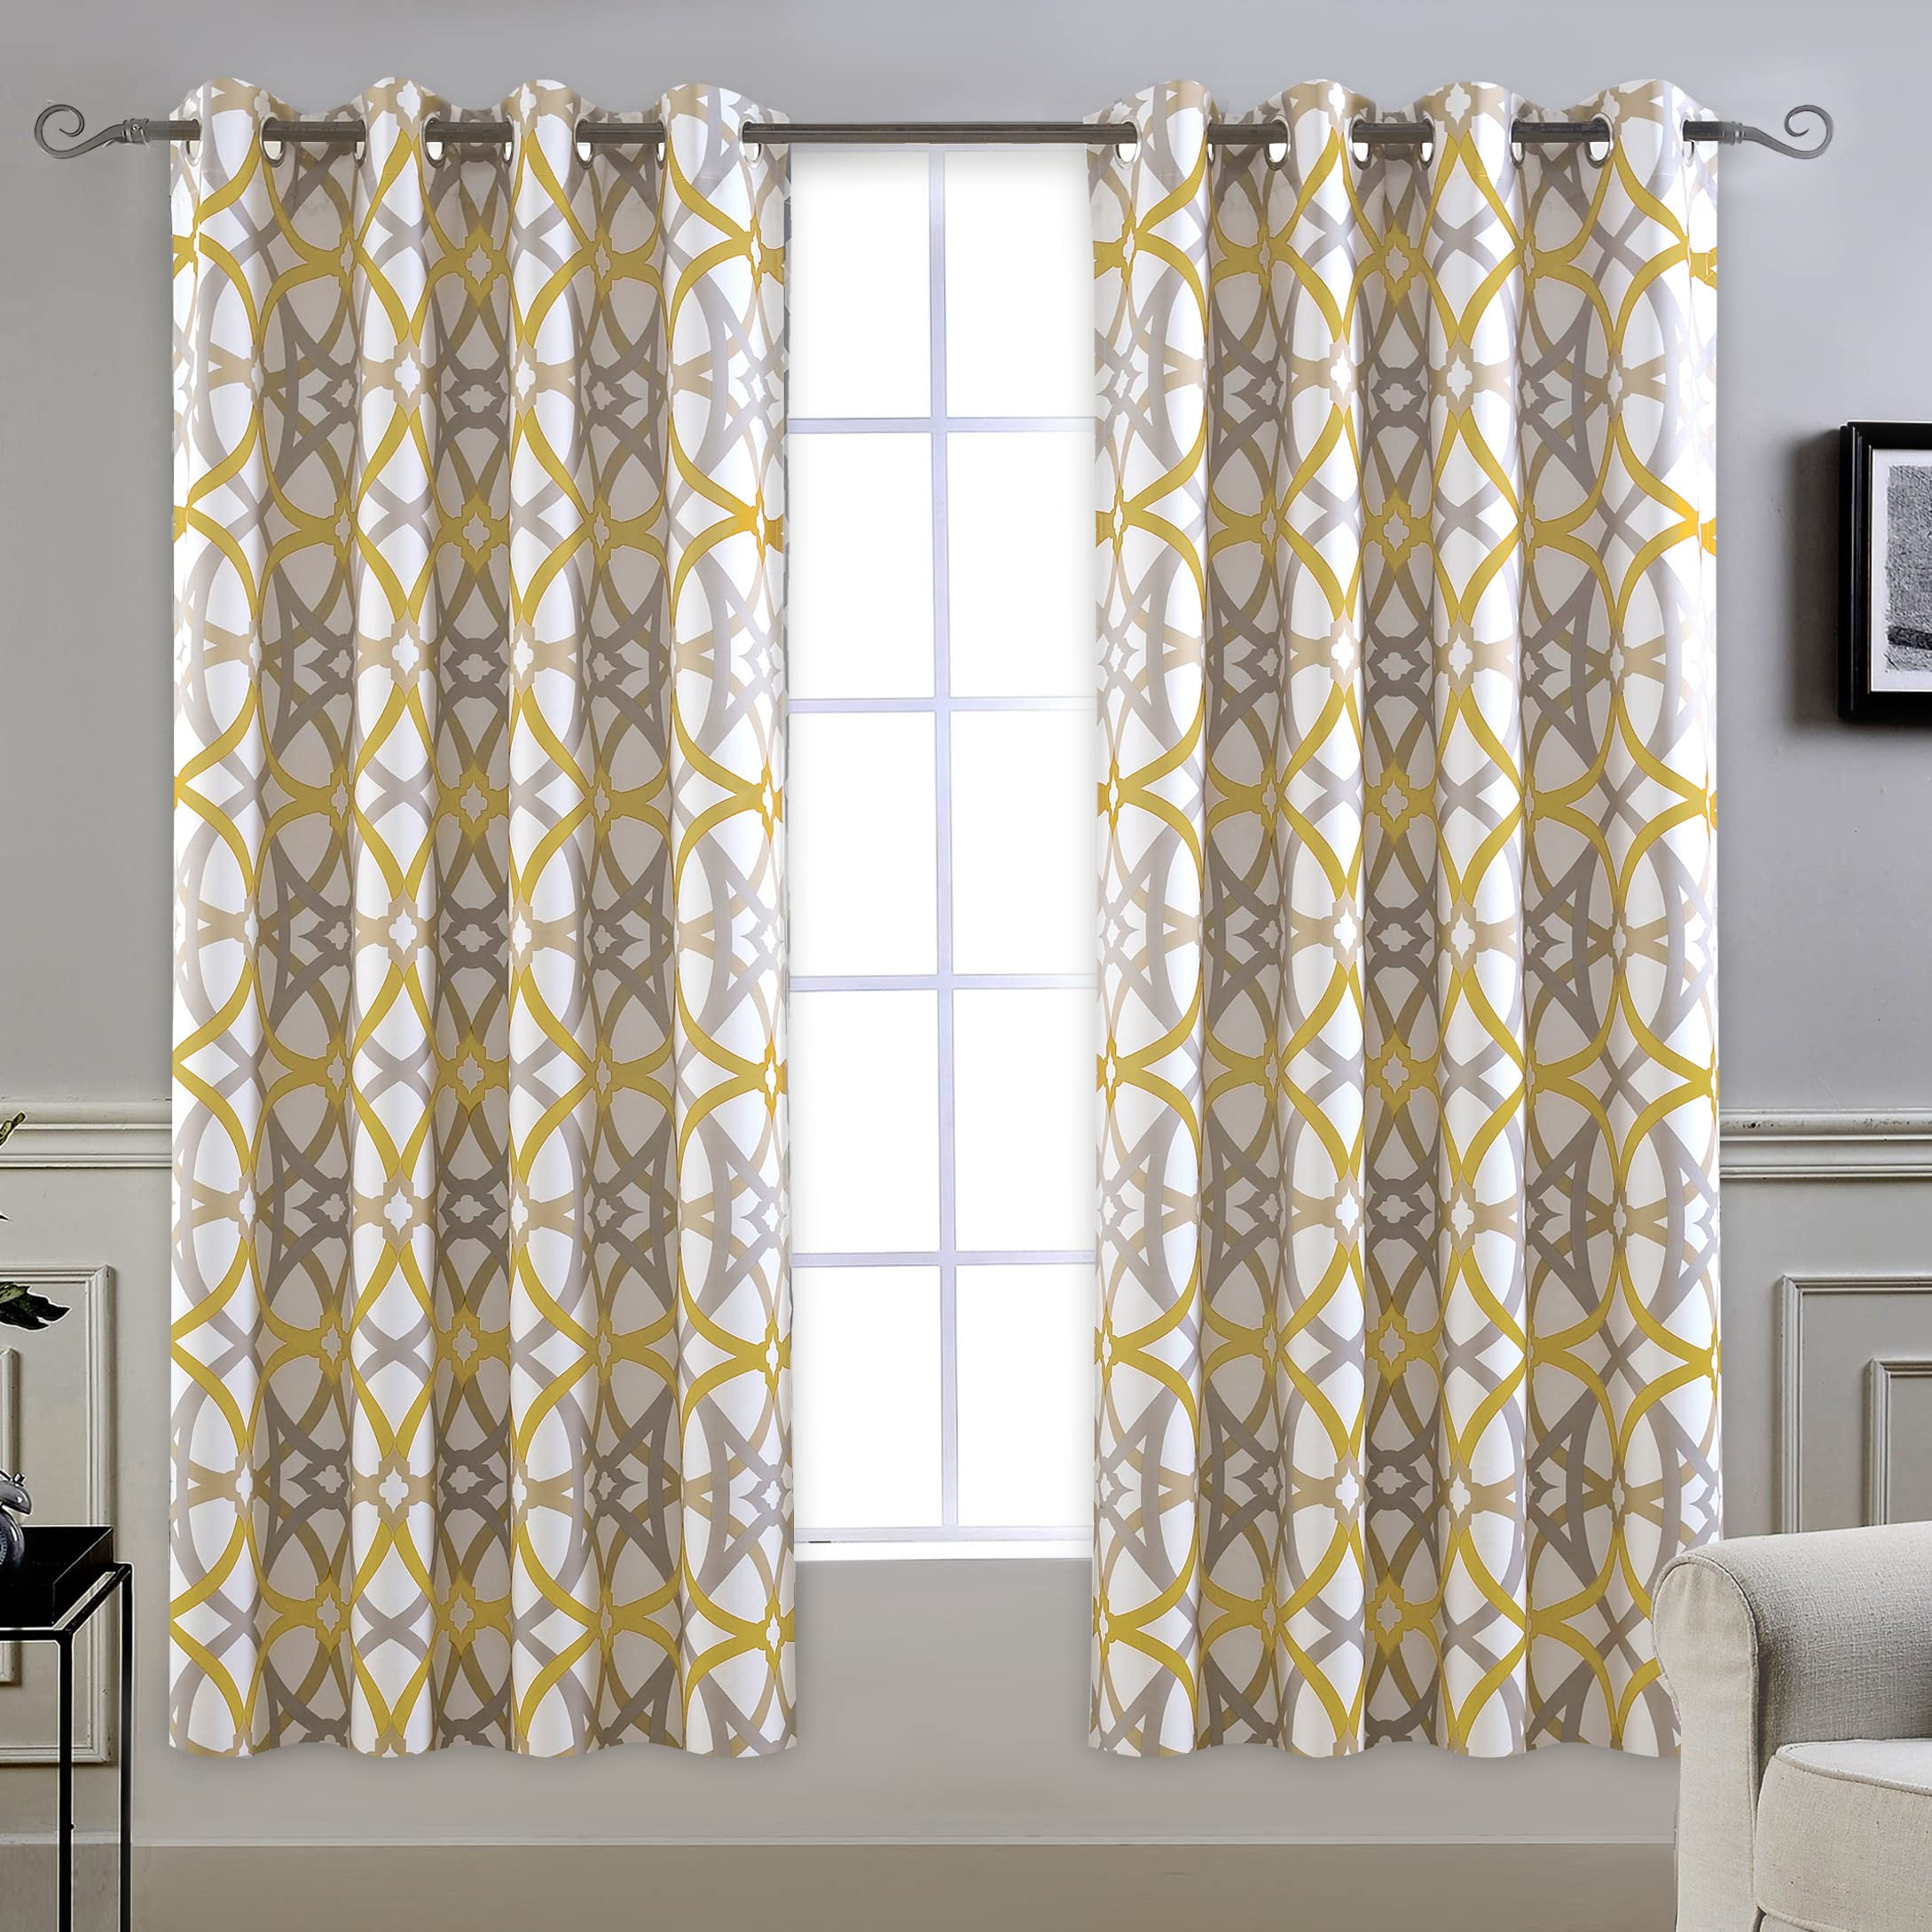 louis vuitton curtains for bedroom